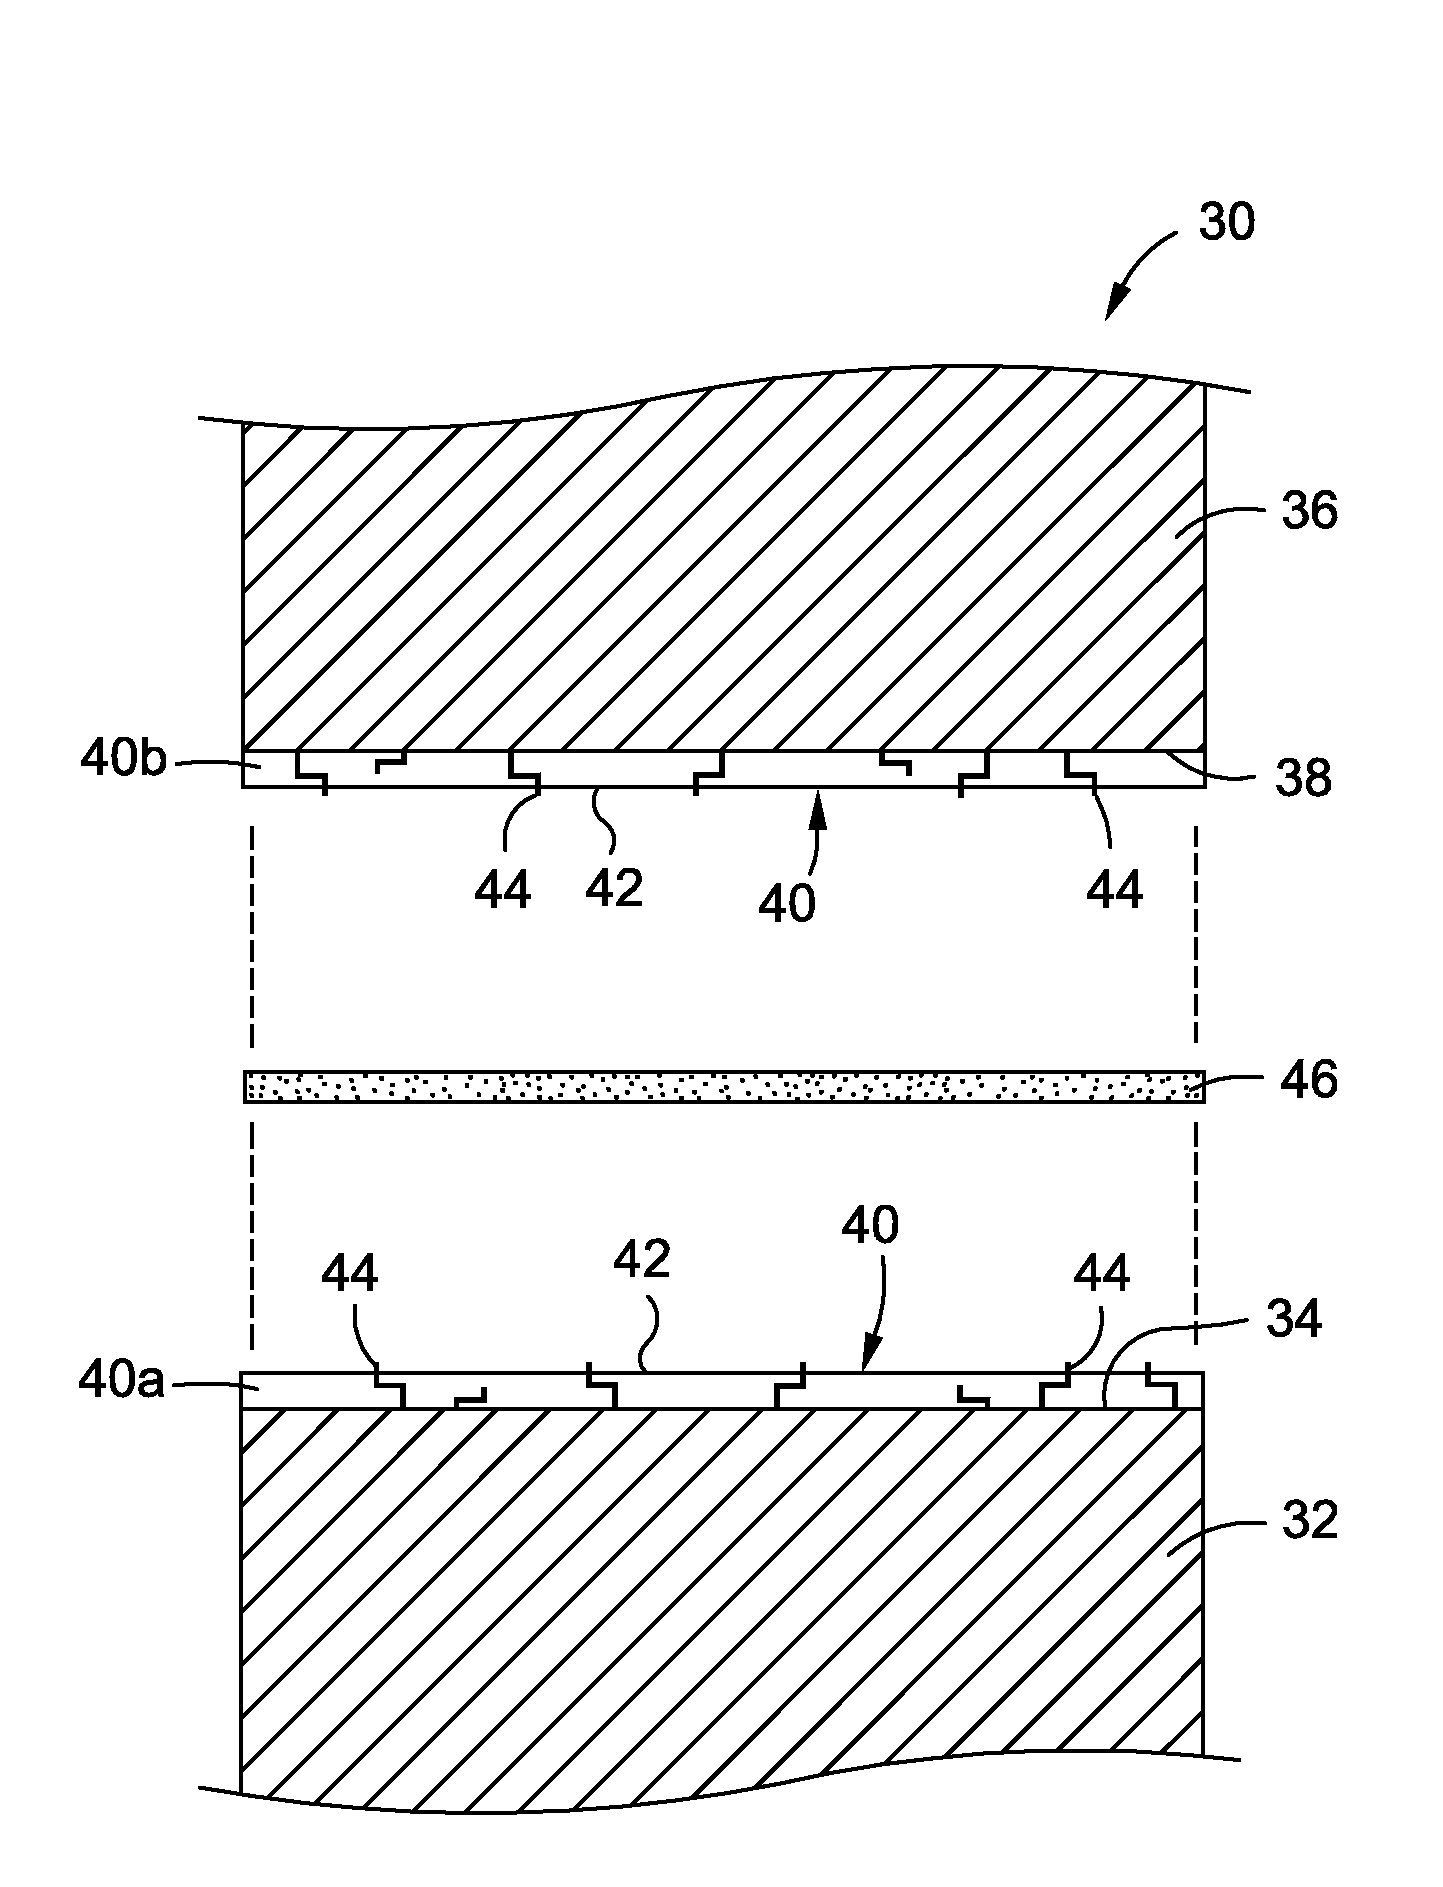 High temperature hybridized molecular functional group adhesion barrier coating and method